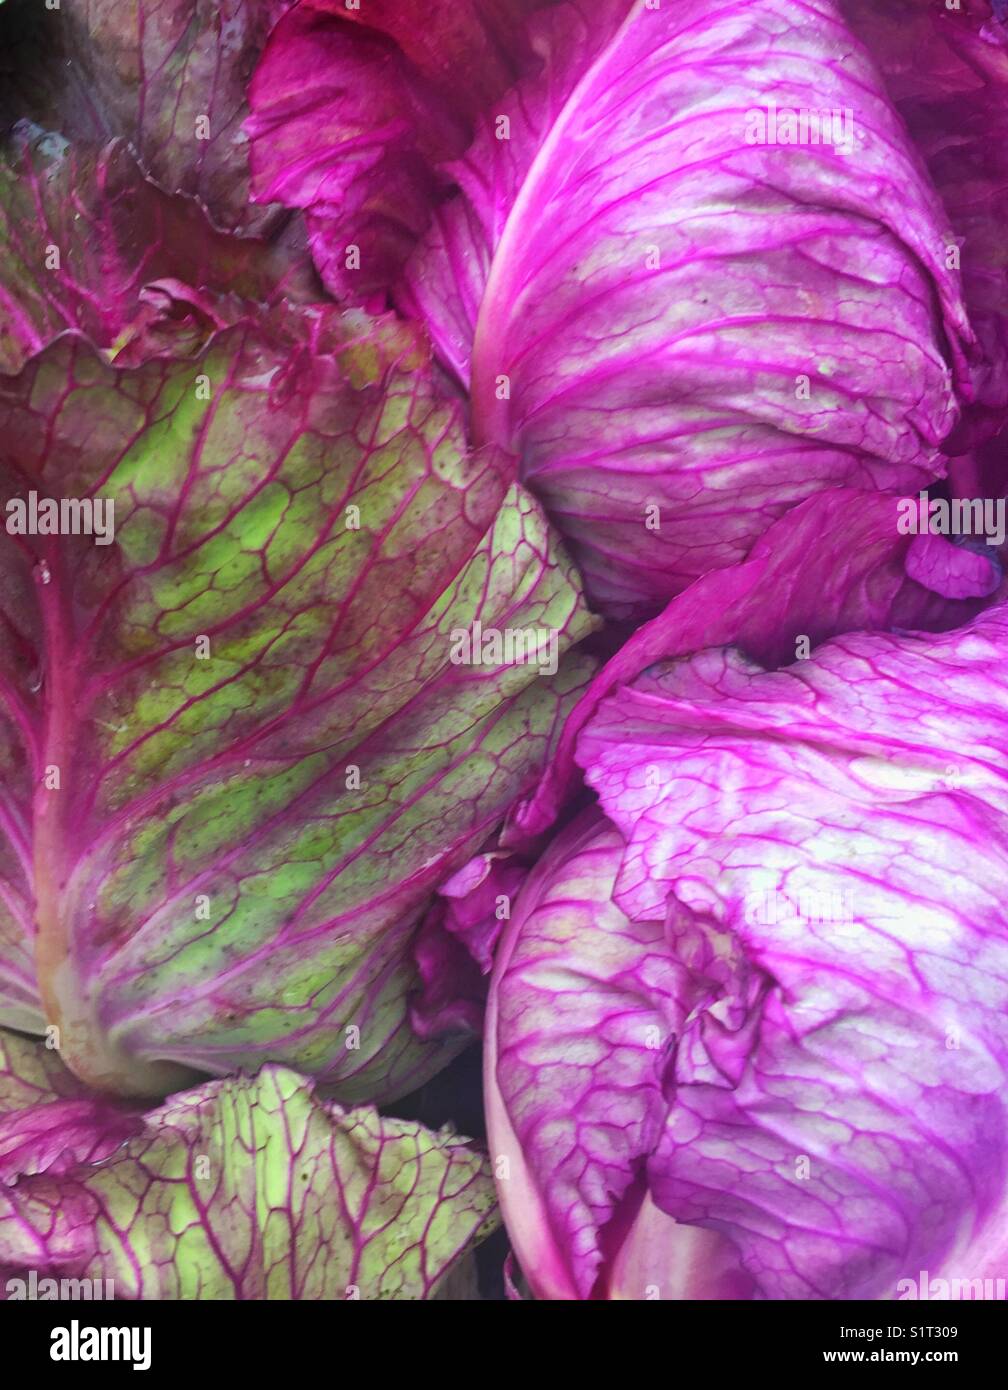 Kalibos Cabbage, European cabbage with gorgeous green and red purple pointed leaves with purple veining Stock Photo